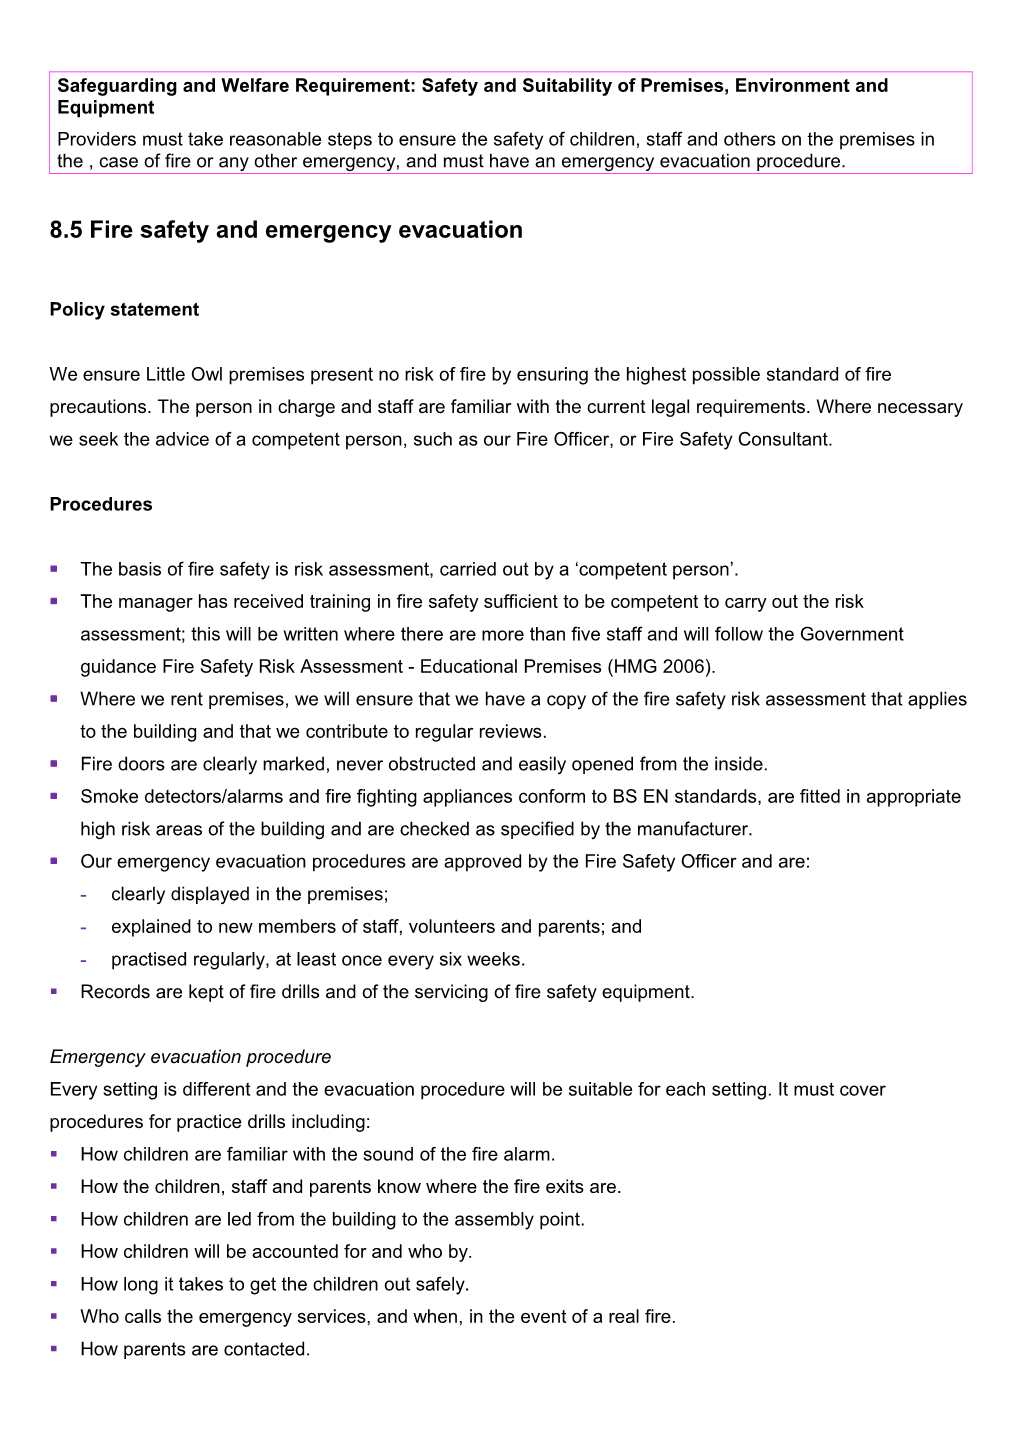 8.5Fire Safety and Emergency Evacuation